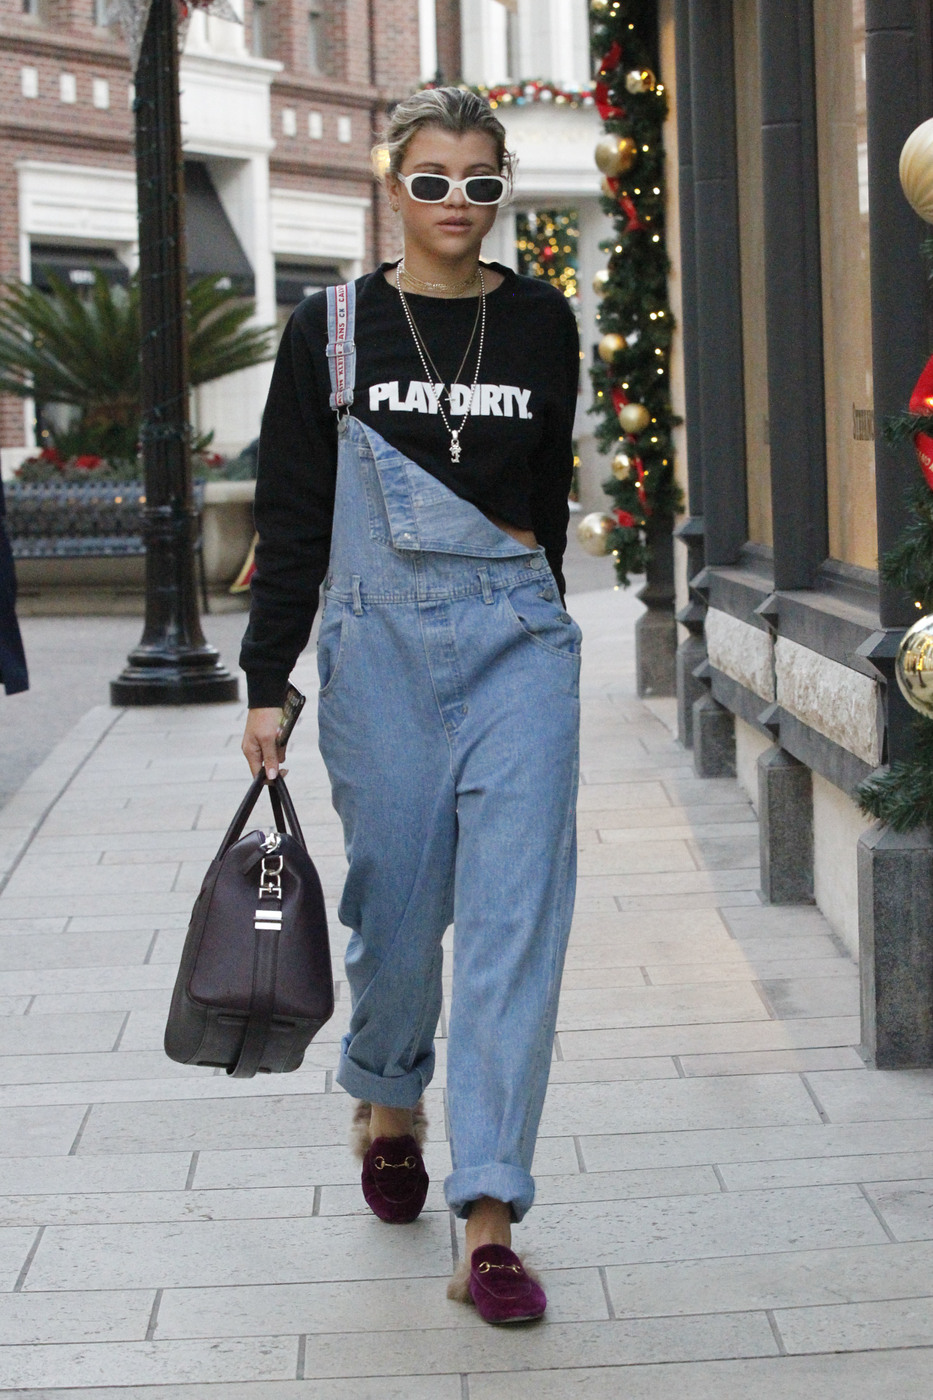 Sofia Richie Look for Less